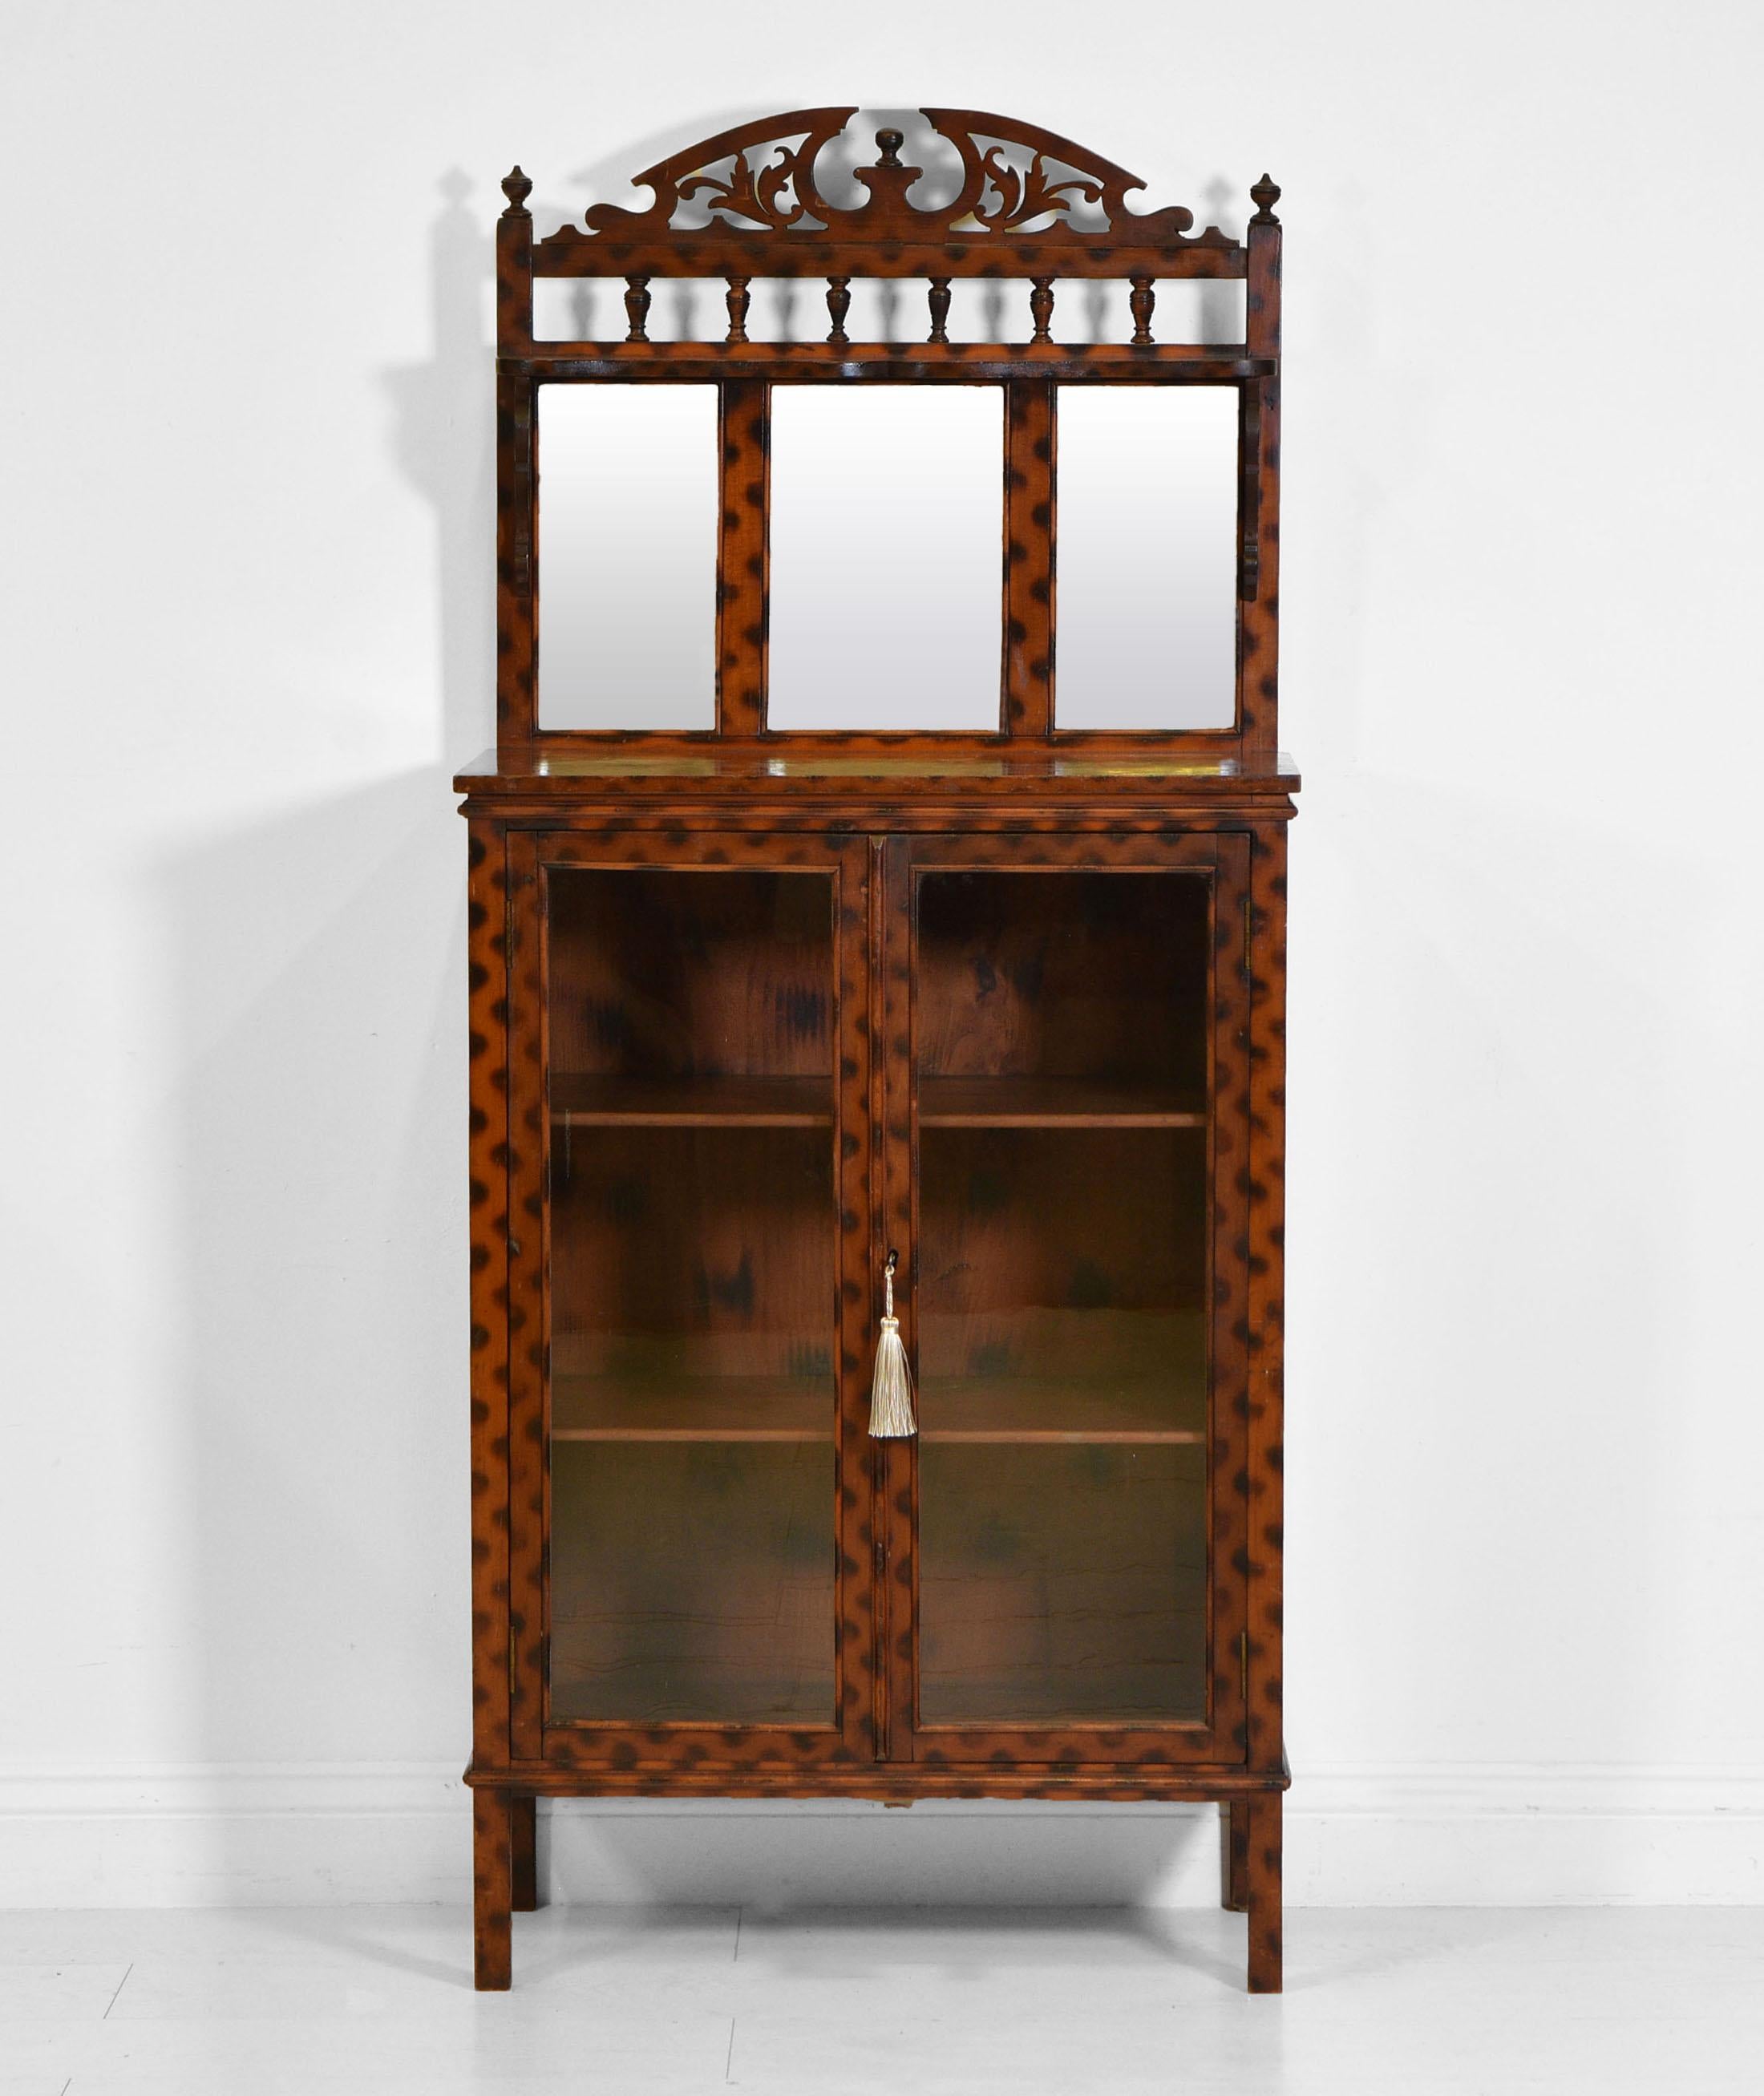 An unusual and quite rare Edwardian antique bookcase cabinet with the original burnt patterned finish. Circa 1900.

The original finish to this decorative cabinet does have a slightly distressed patina in places, expected with age. It has been